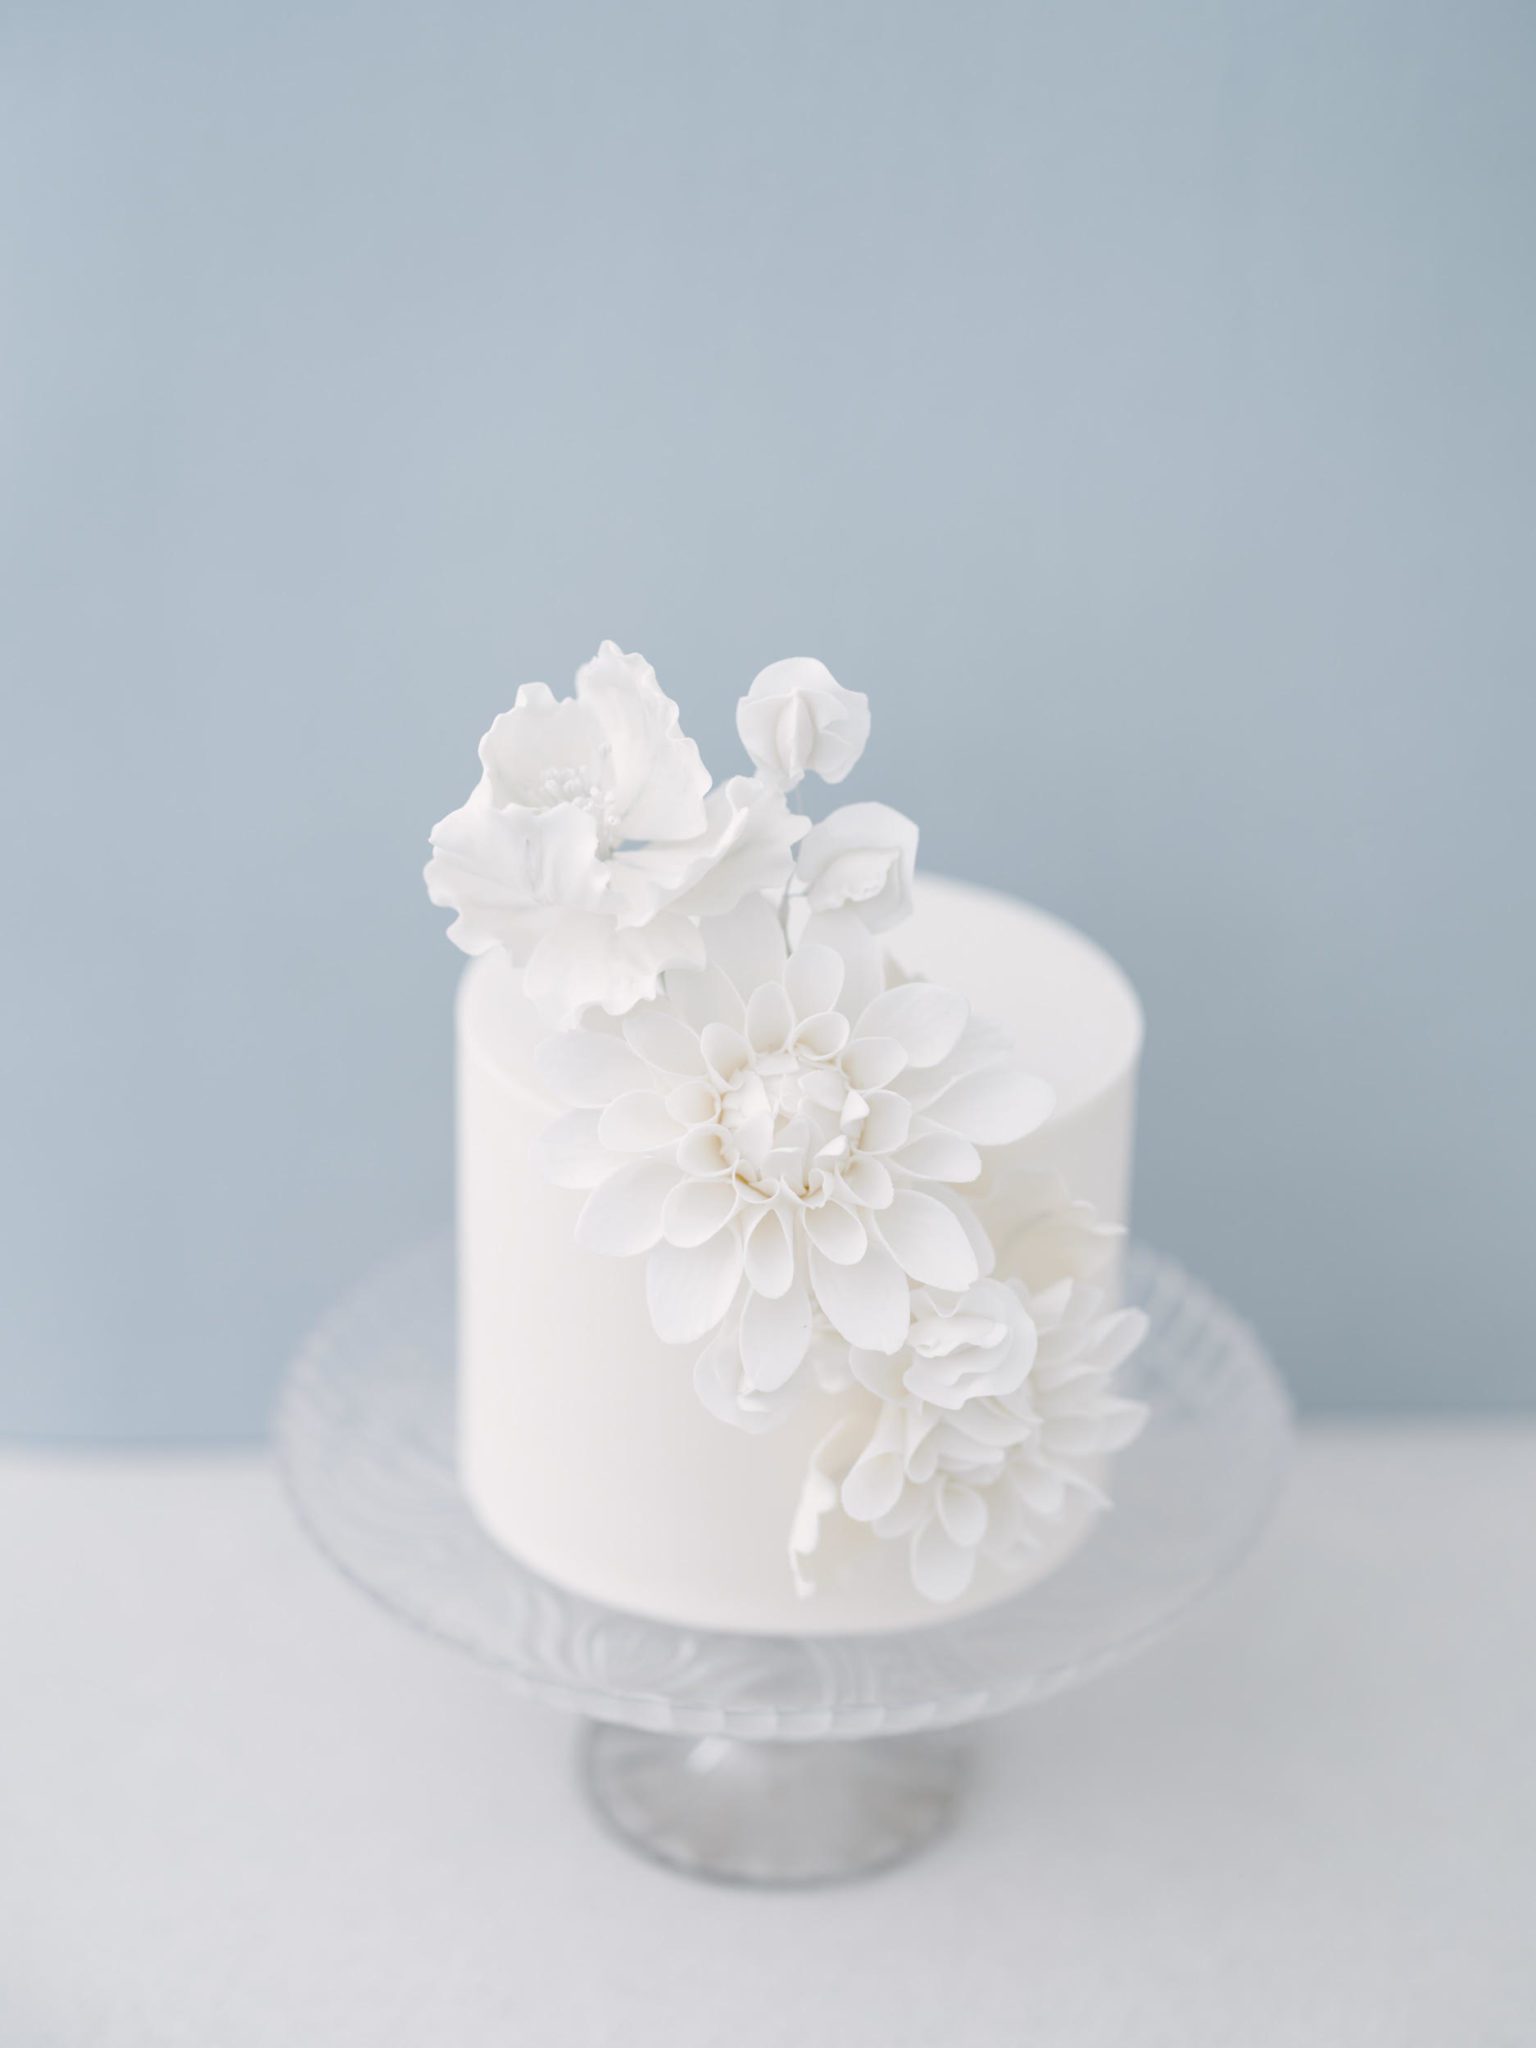 Cute one-tier sugar flower cake perfect for a small wedding or elopement